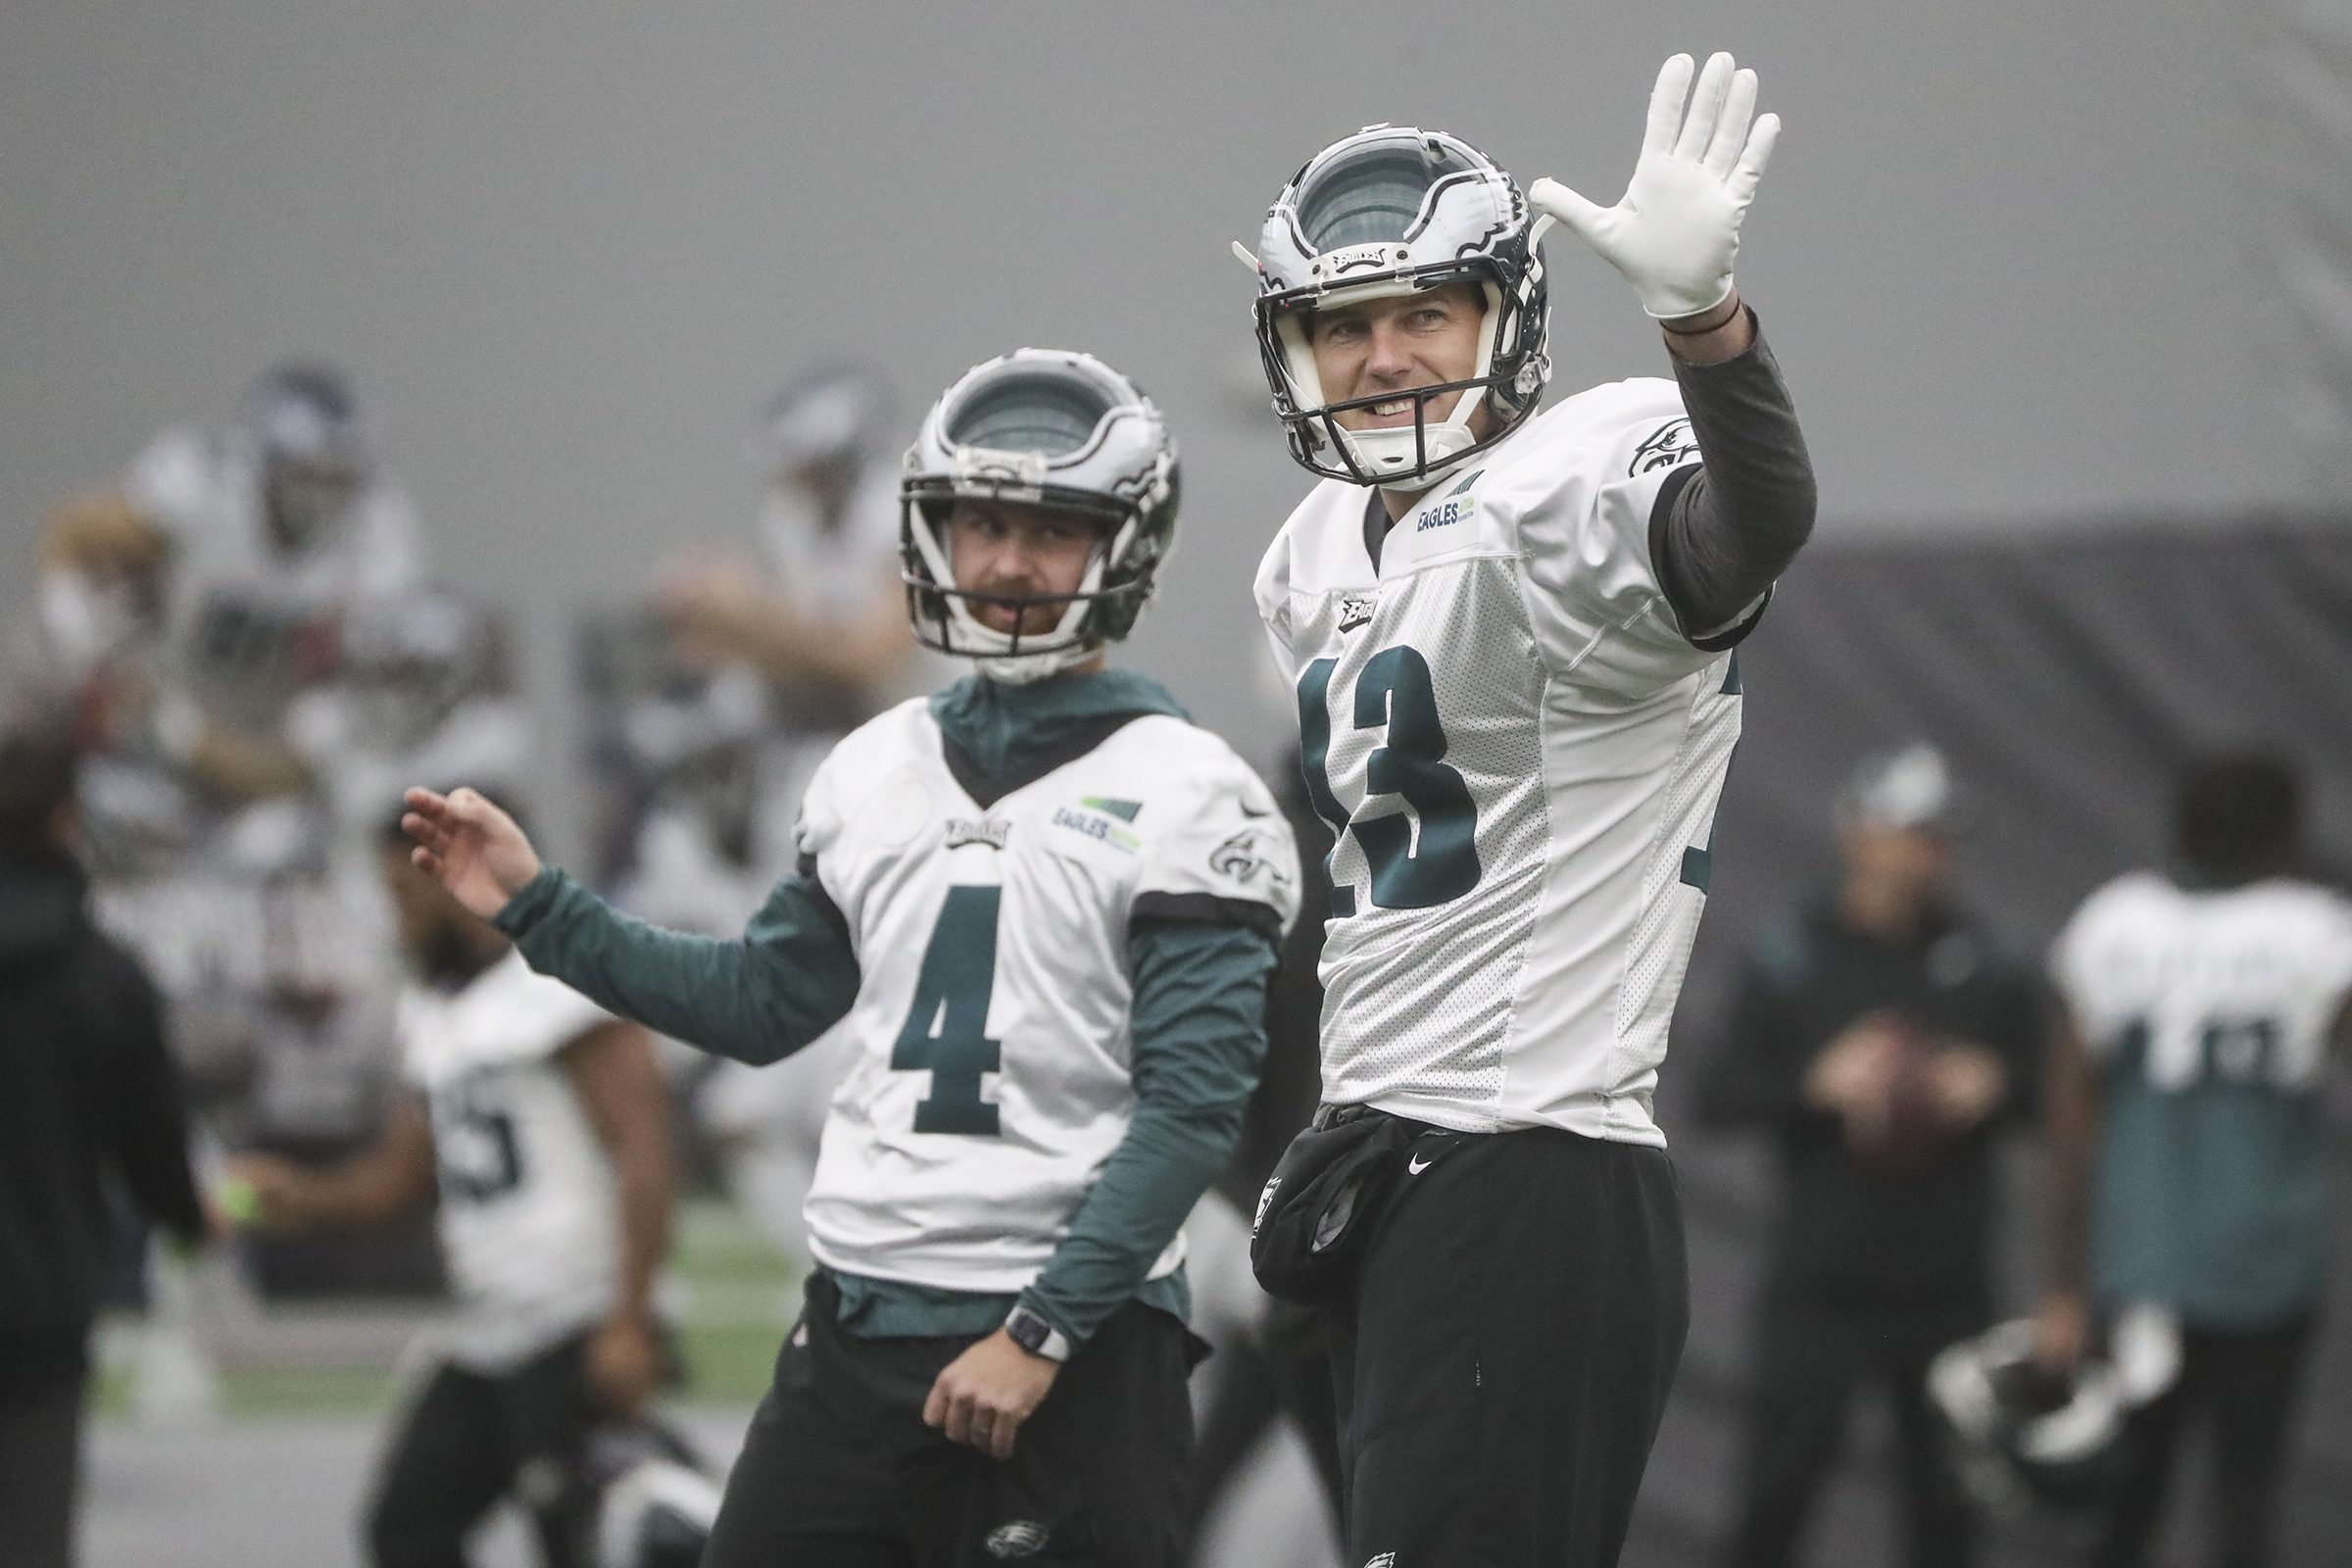 The Eagles' receivers are extremely nonthreatening